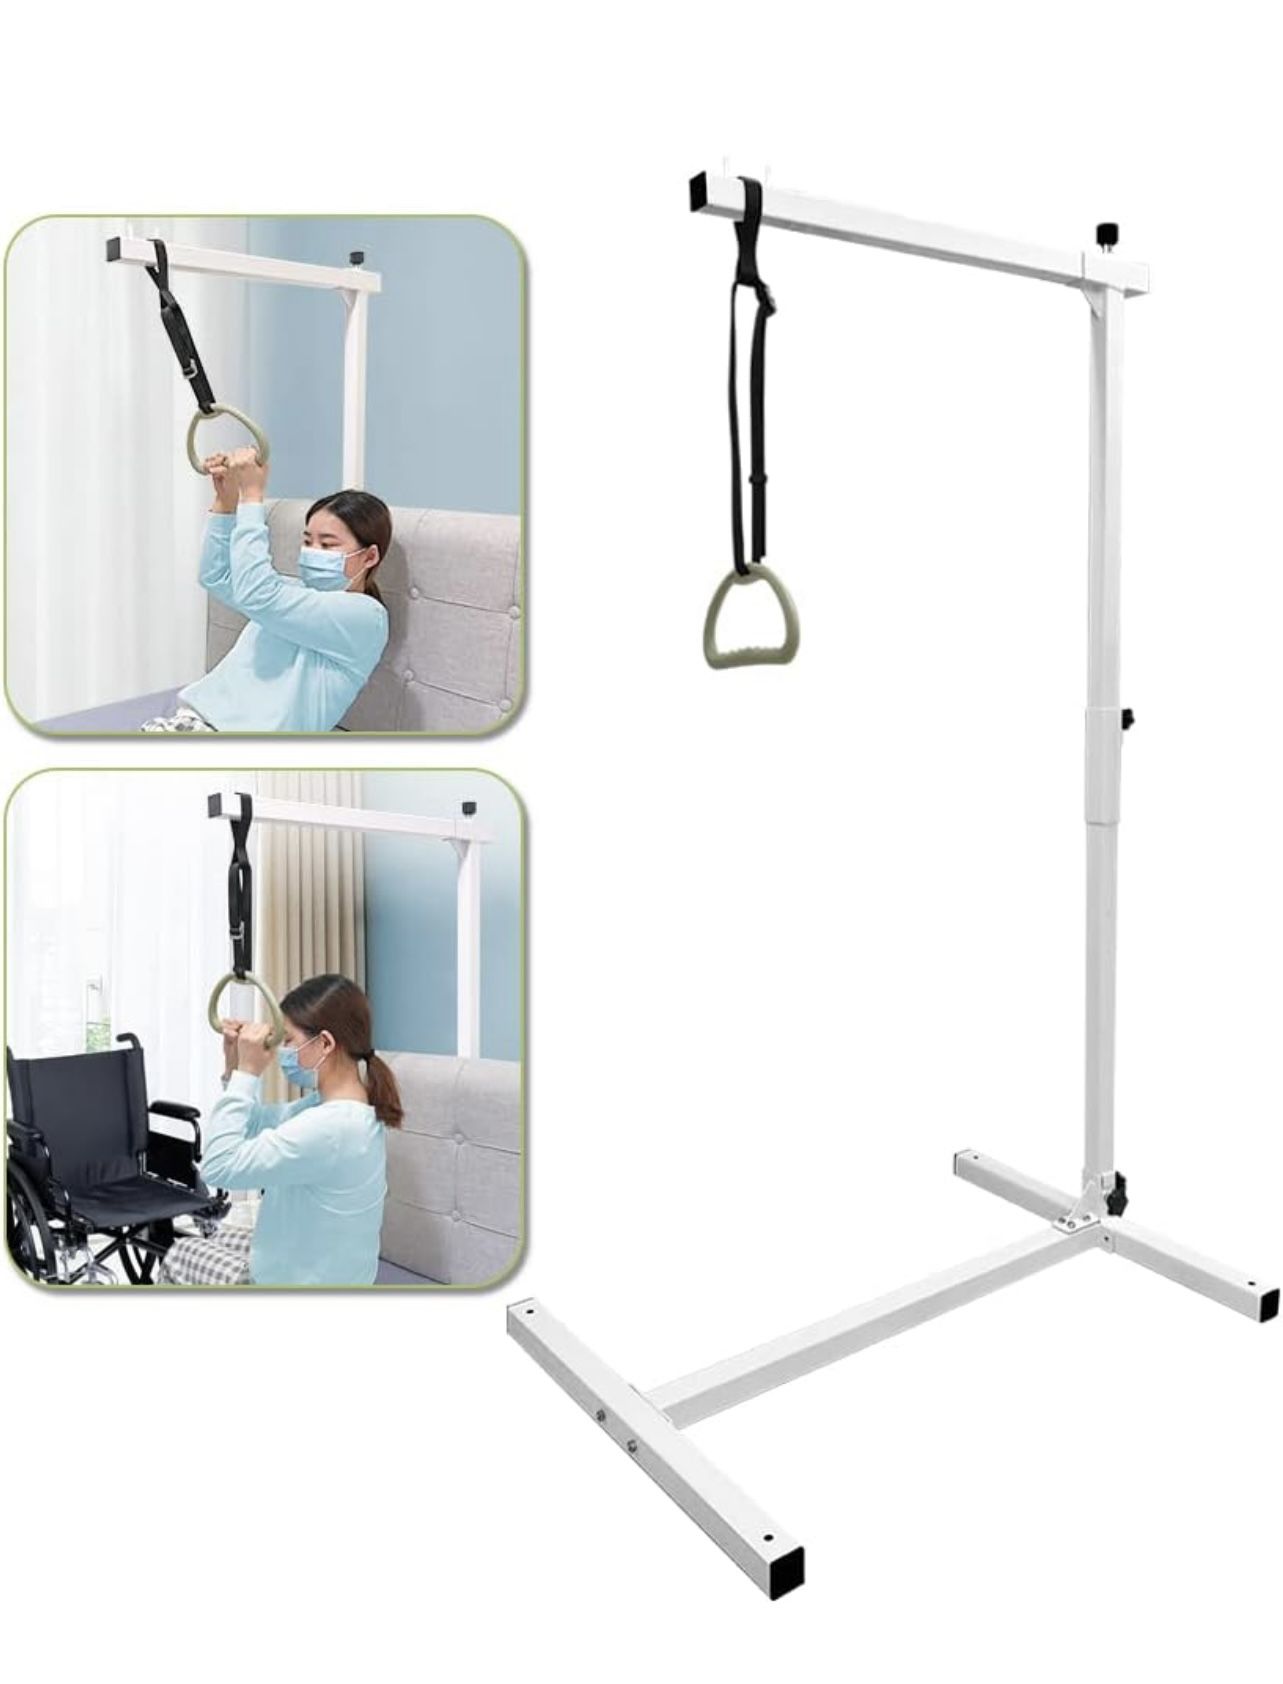 Trapeze  Pull Up Bar Bed / Lift for Elderly Seniors/Handicap Bariatric Bed Assistance